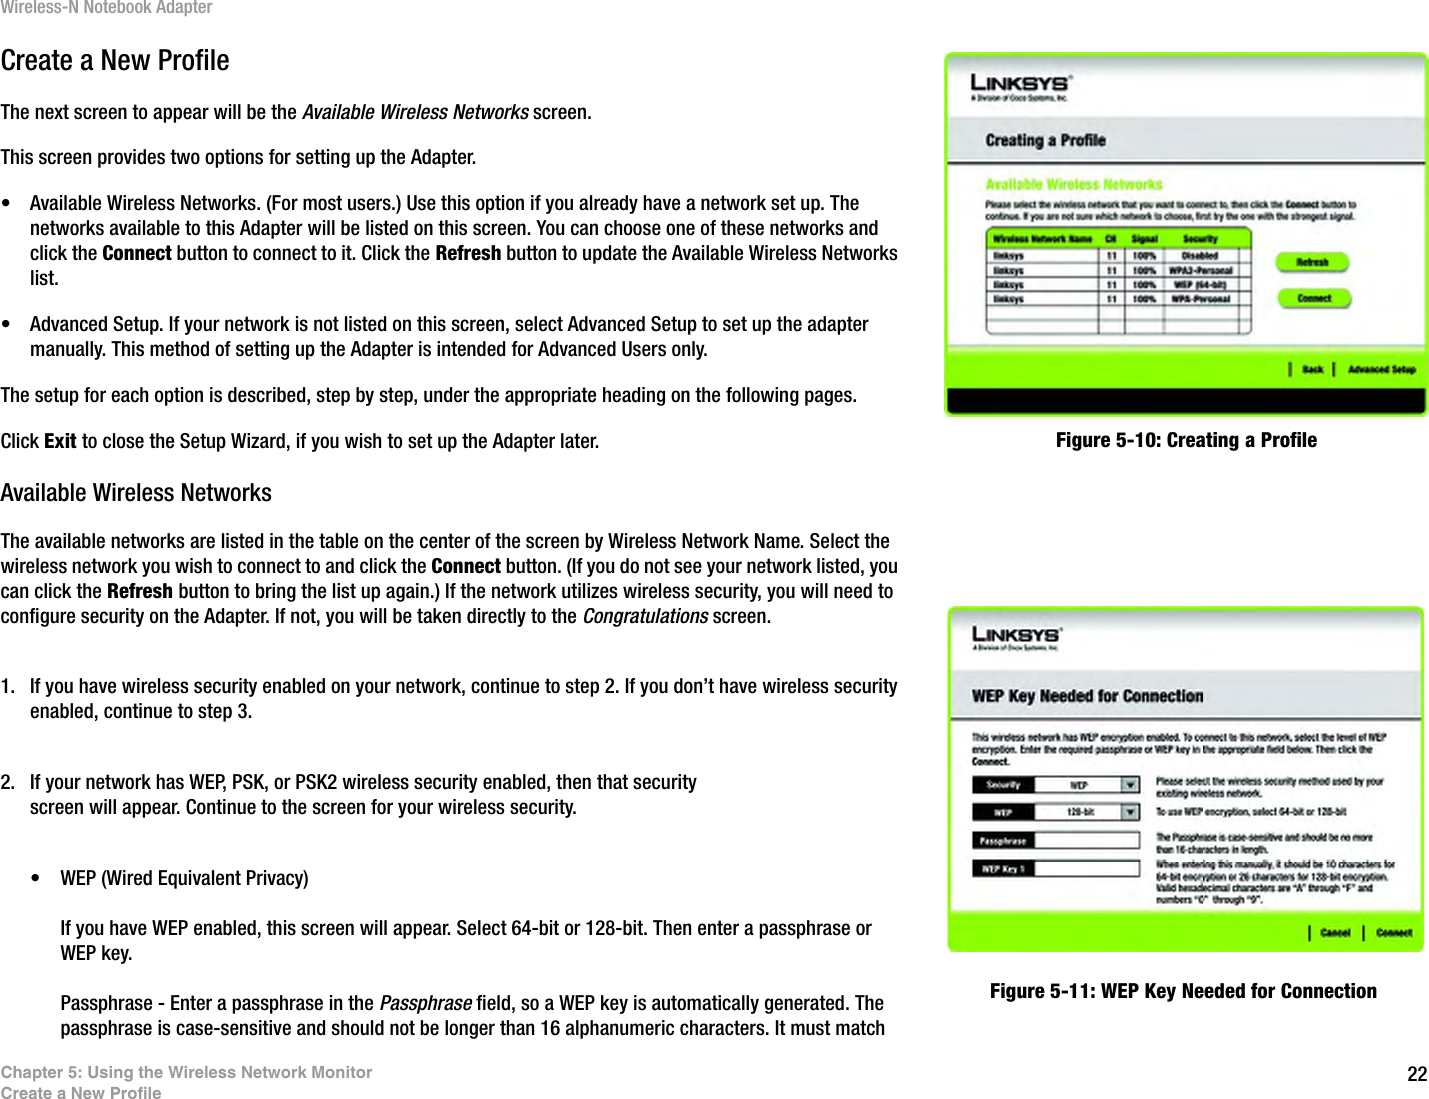 22Chapter 5: Using the Wireless Network MonitorCreate a New ProfileWireless-N Notebook AdapterCreate a New ProfileThe next screen to appear will be the Available Wireless Networks screen.This screen provides two options for setting up the Adapter.• Available Wireless Networks. (For most users.) Use this option if you already have a network set up. The networks available to this Adapter will be listed on this screen. You can choose one of these networks and click the Connect button to connect to it. Click the Refresh button to update the Available Wireless Networks list. • Advanced Setup. If your network is not listed on this screen, select Advanced Setup to set up the adapter manually. This method of setting up the Adapter is intended for Advanced Users only.The setup for each option is described, step by step, under the appropriate heading on the following pages.Click Exit to close the Setup Wizard, if you wish to set up the Adapter later.Available Wireless NetworksThe available networks are listed in the table on the center of the screen by Wireless Network Name. Select the wireless network you wish to connect to and click the Connect button. (If you do not see your network listed, you can click the Refresh button to bring the list up again.) If the network utilizes wireless security, you will need to configure security on the Adapter. If not, you will be taken directly to the Congratulations screen.1. If you have wireless security enabled on your network, continue to step 2. If you don’t have wireless security enabled, continue to step 3. 2. If your network has WEP, PSK, or PSK2 wireless security enabled, then that security screen will appear. Continue to the screen for your wireless security.• WEP (Wired Equivalent Privacy) If you have WEP enabled, this screen will appear. Select 64-bit or 128-bit. Then enter a passphrase or WEP key.Passphrase - Enter a passphrase in the Passphrase field, so a WEP key is automatically generated. The passphrase is case-sensitive and should not be longer than 16 alphanumeric characters. It must match Figure 5-10: Creating a ProfileFigure 5-11: WEP Key Needed for Connection